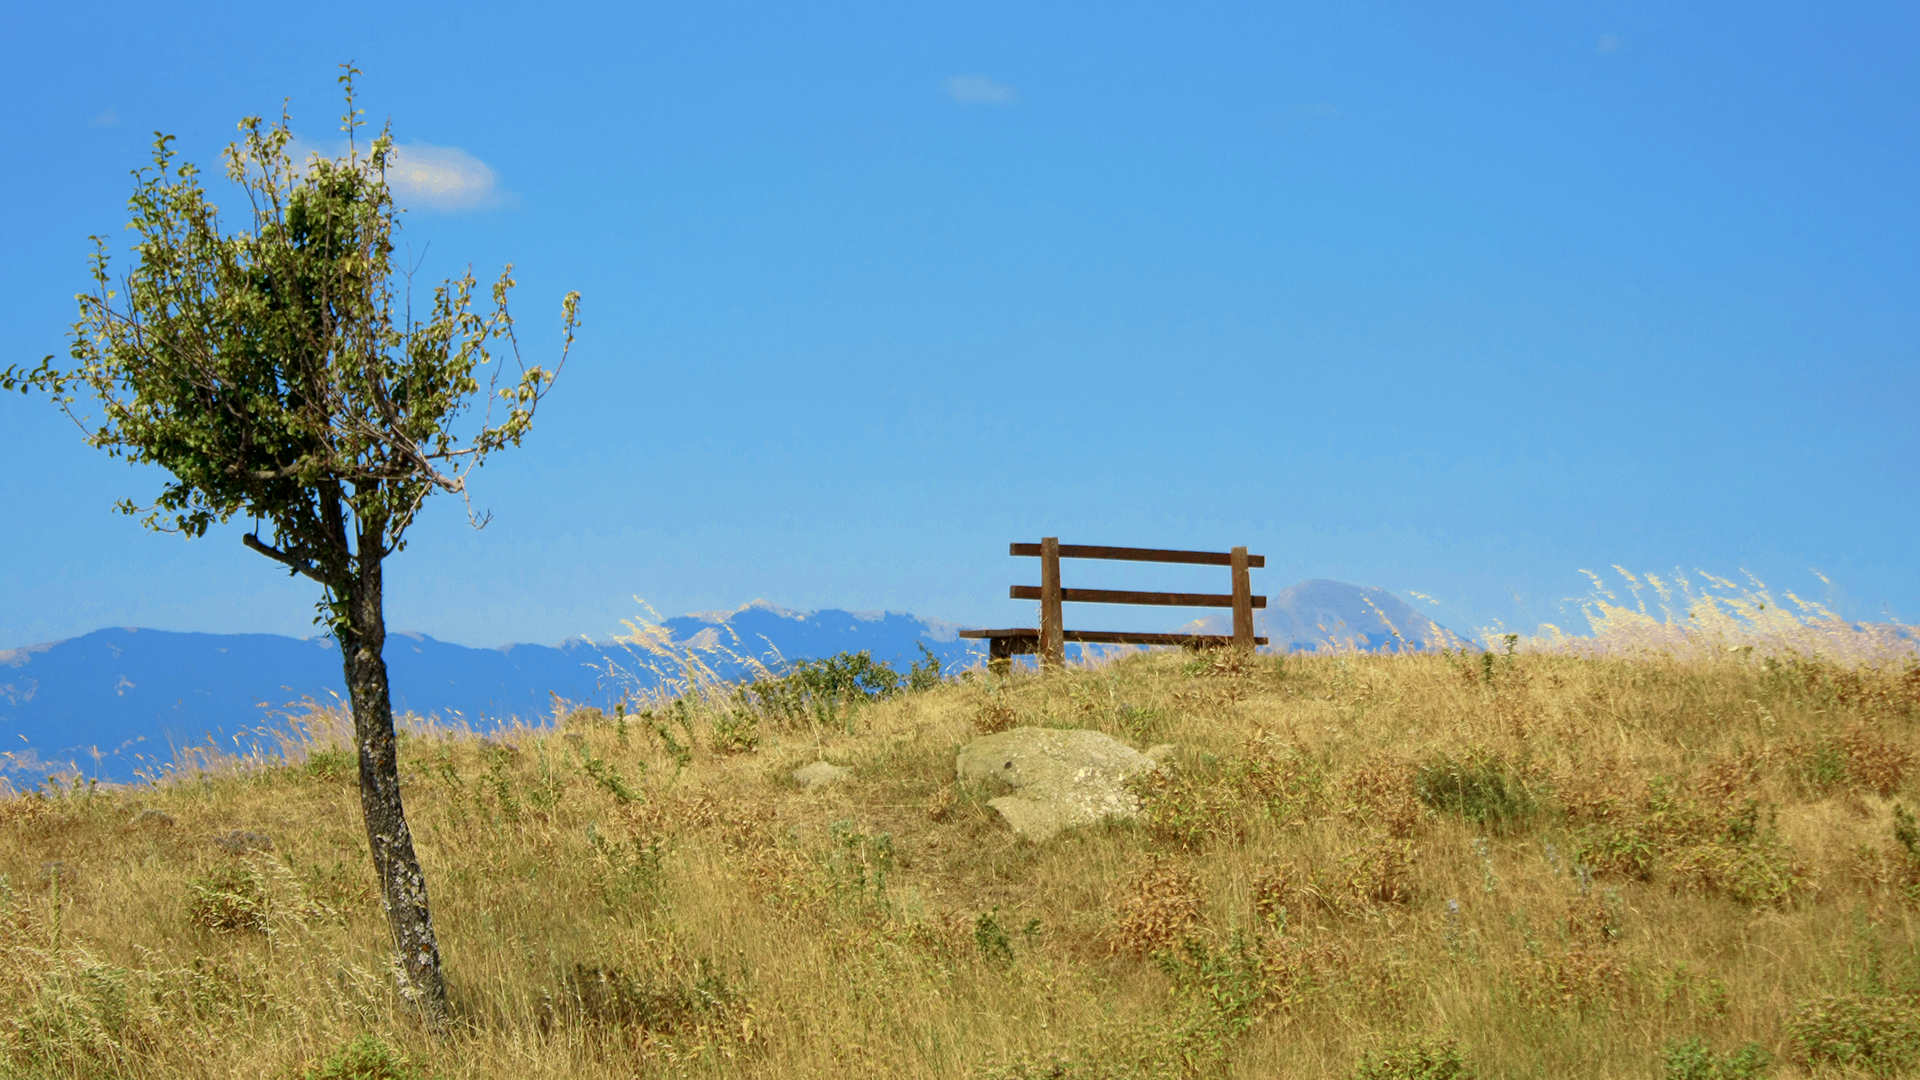 A bench and a tree on a hill with the surrounding mountains in the background